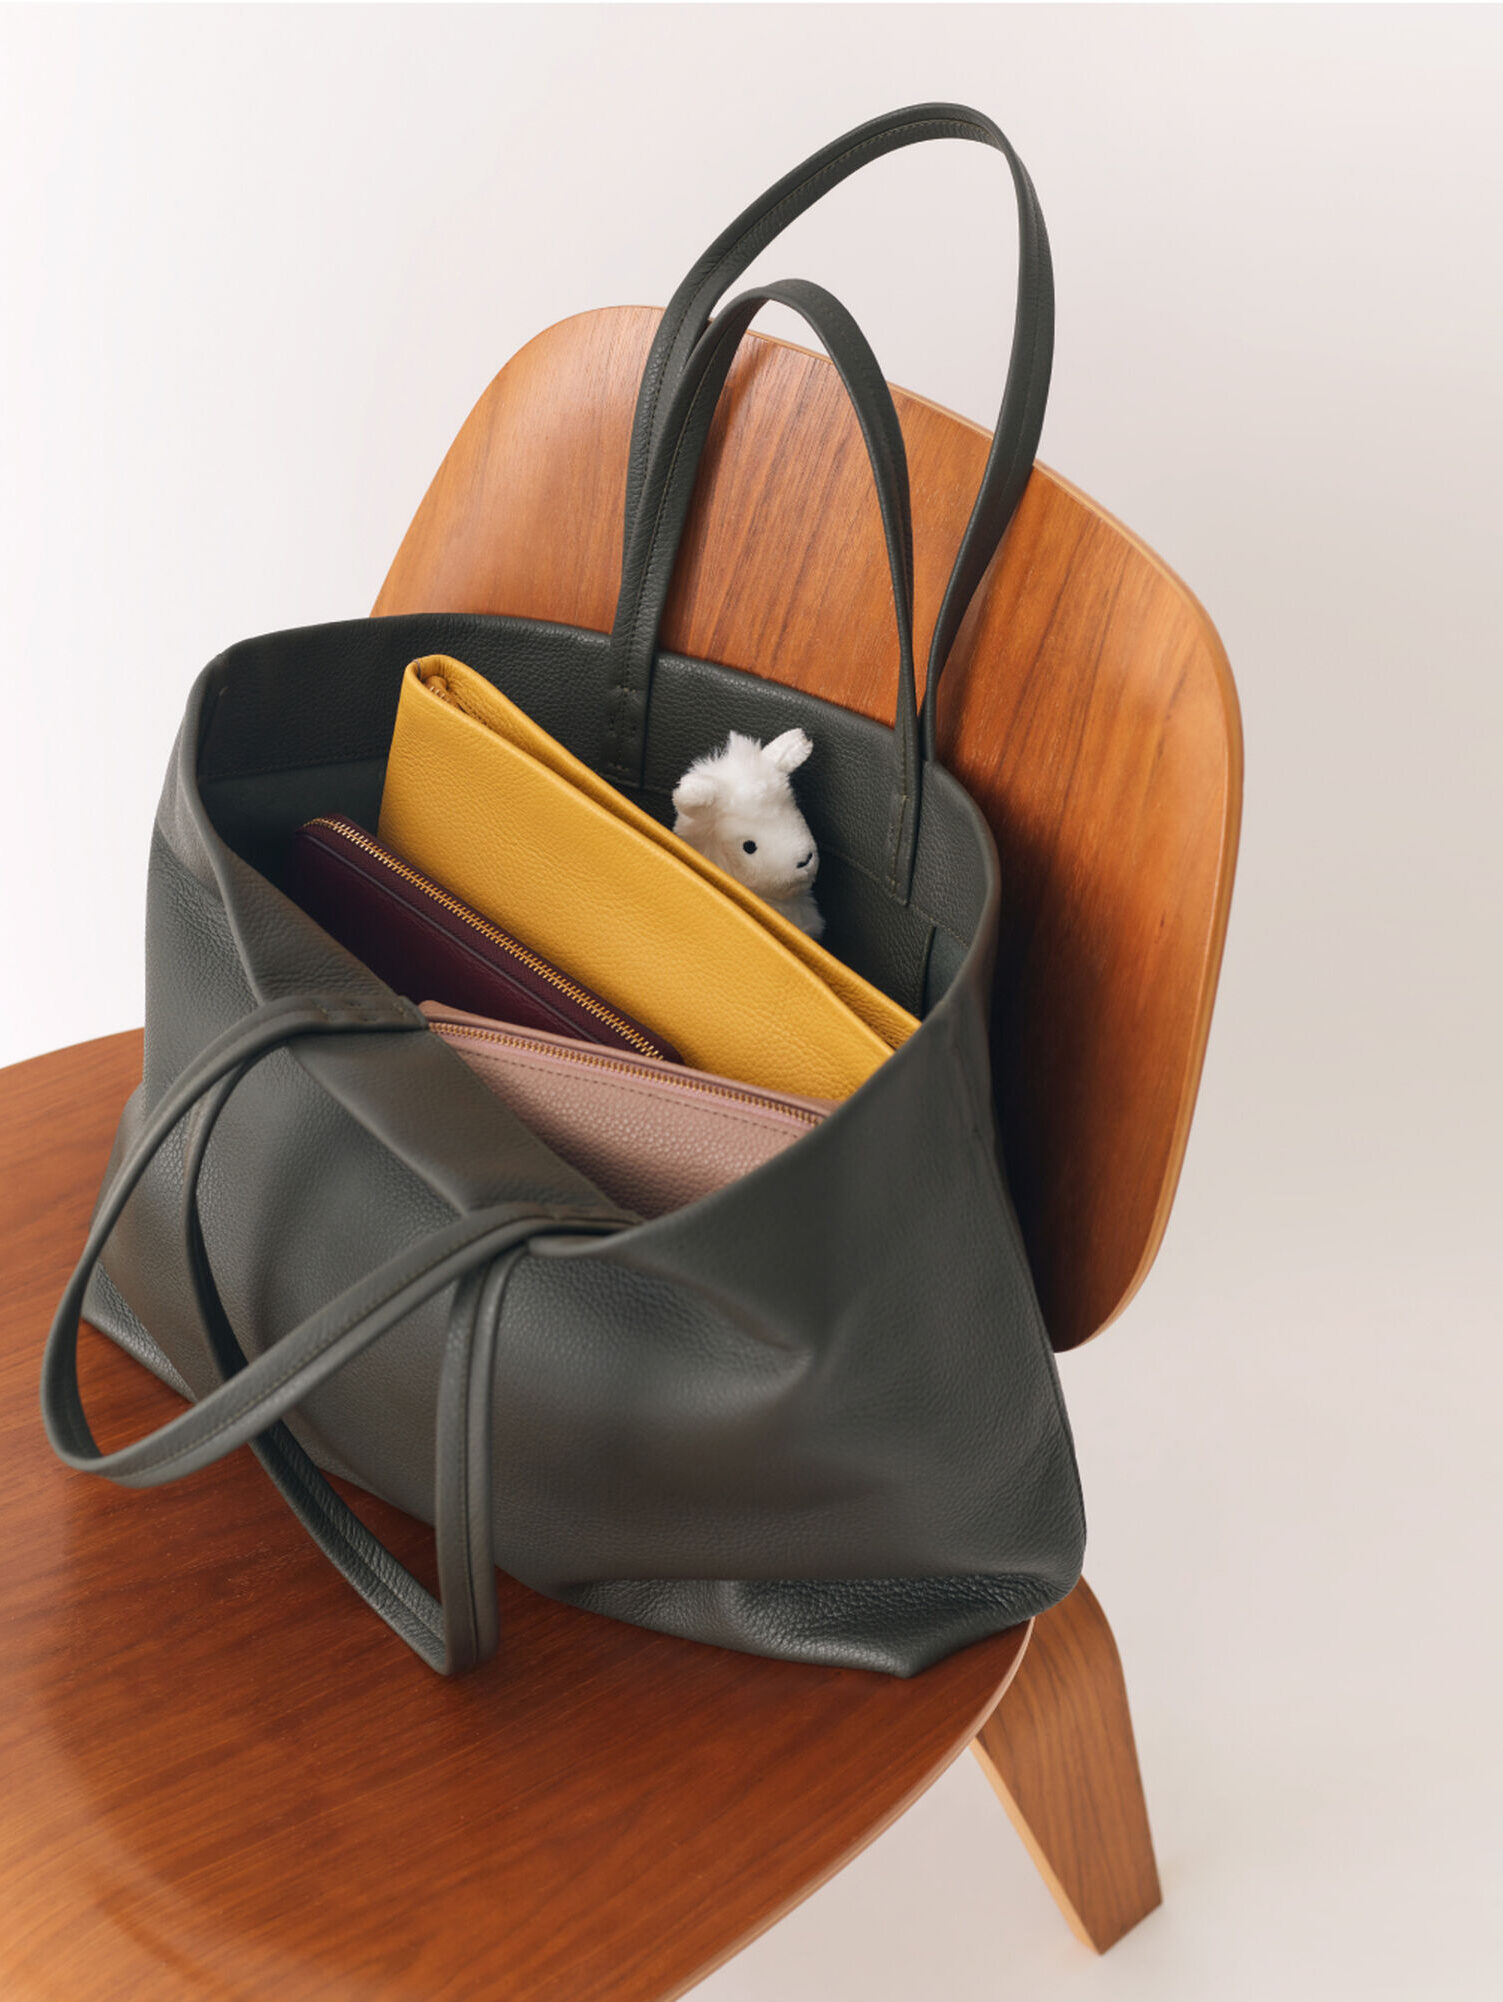 A green bag sits open on a chair, showing the contents withint (two pouches, a folder, and a stuffed animal)